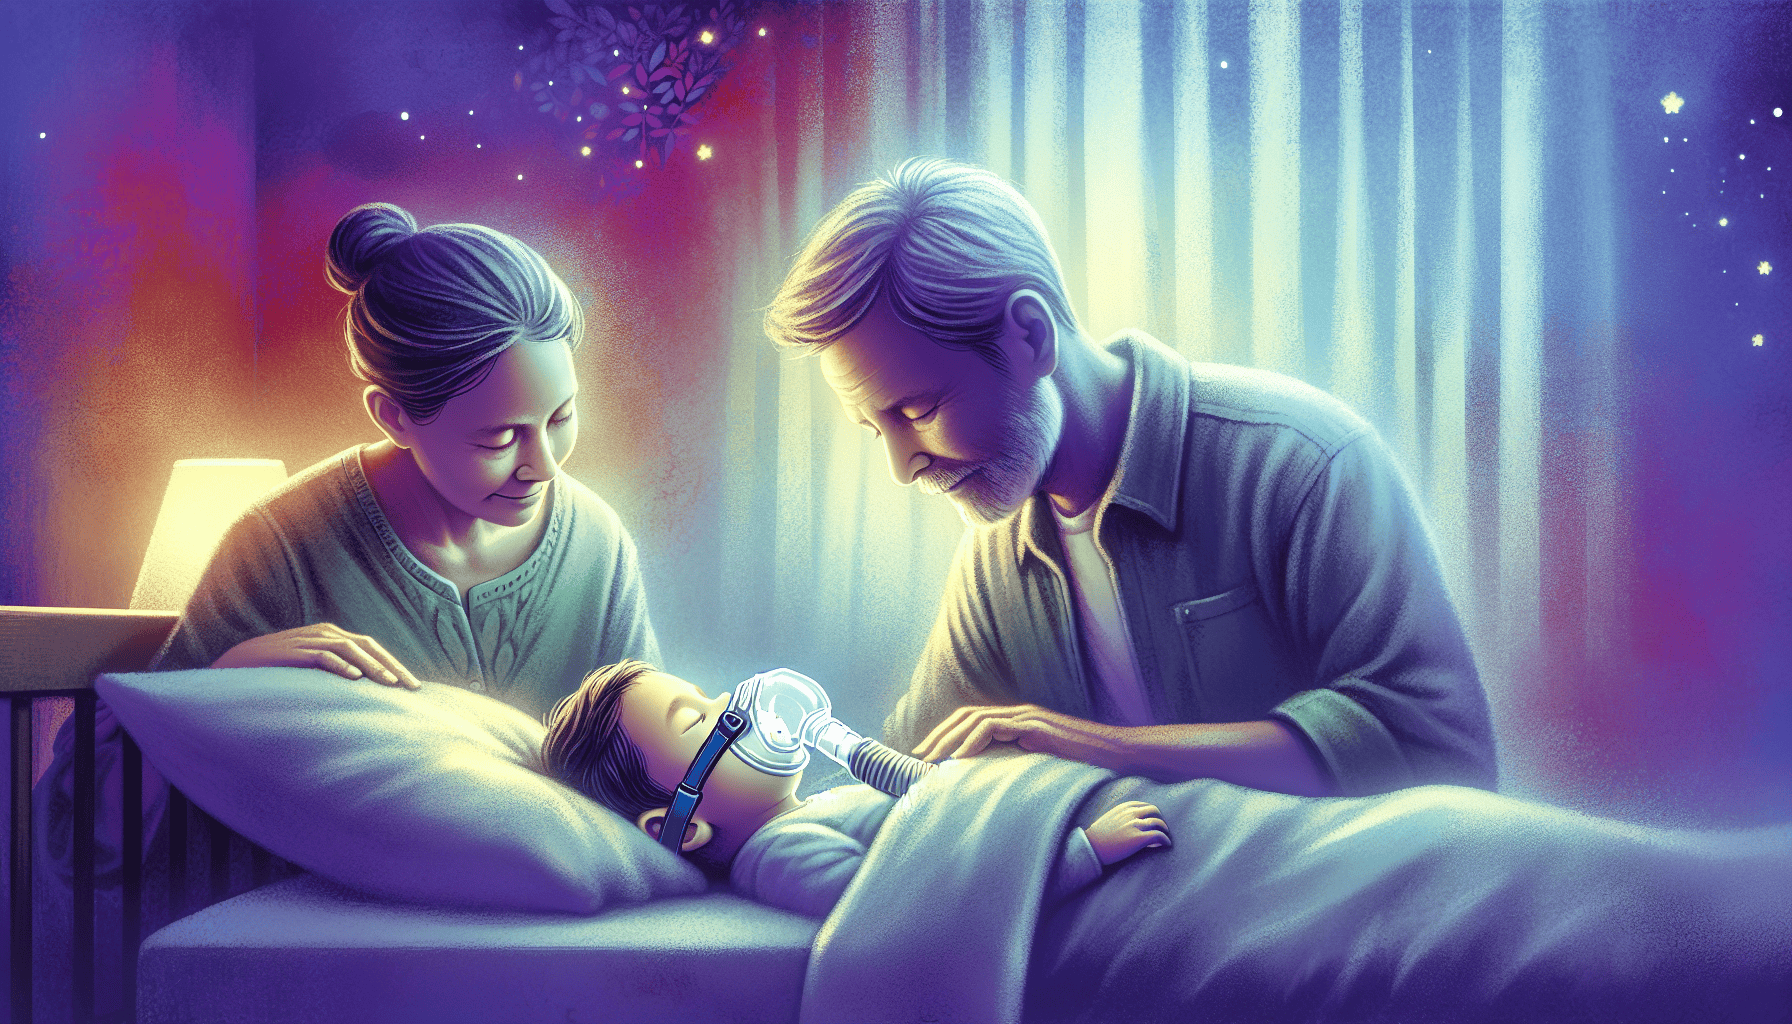 Illustration of parents supporting a child with sleep apnea